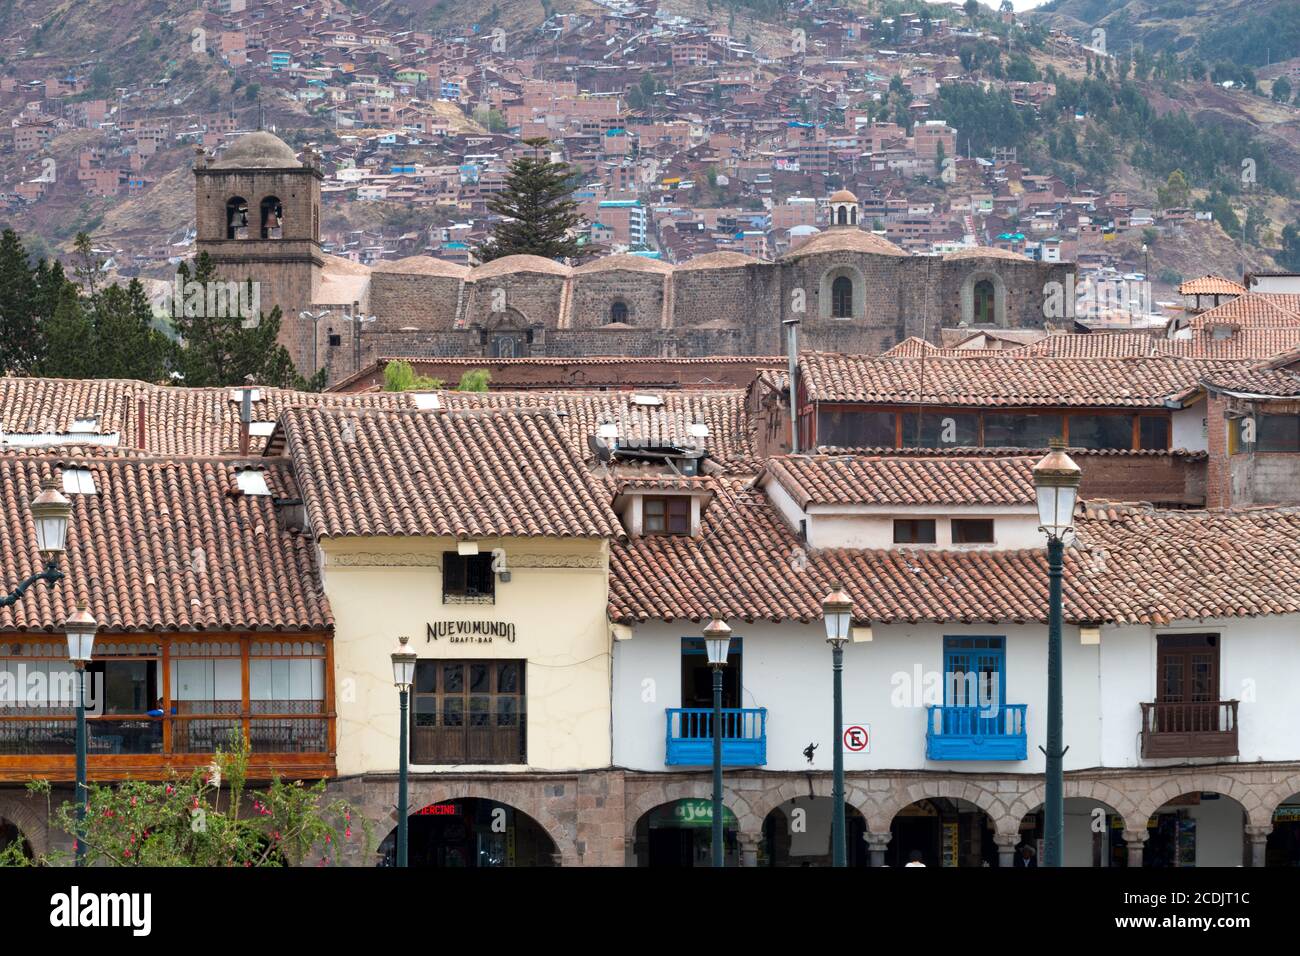 Cusco, Peru - october 08, 2018: View of balconies in the historical central square of Cusco, Peru Stock Photo